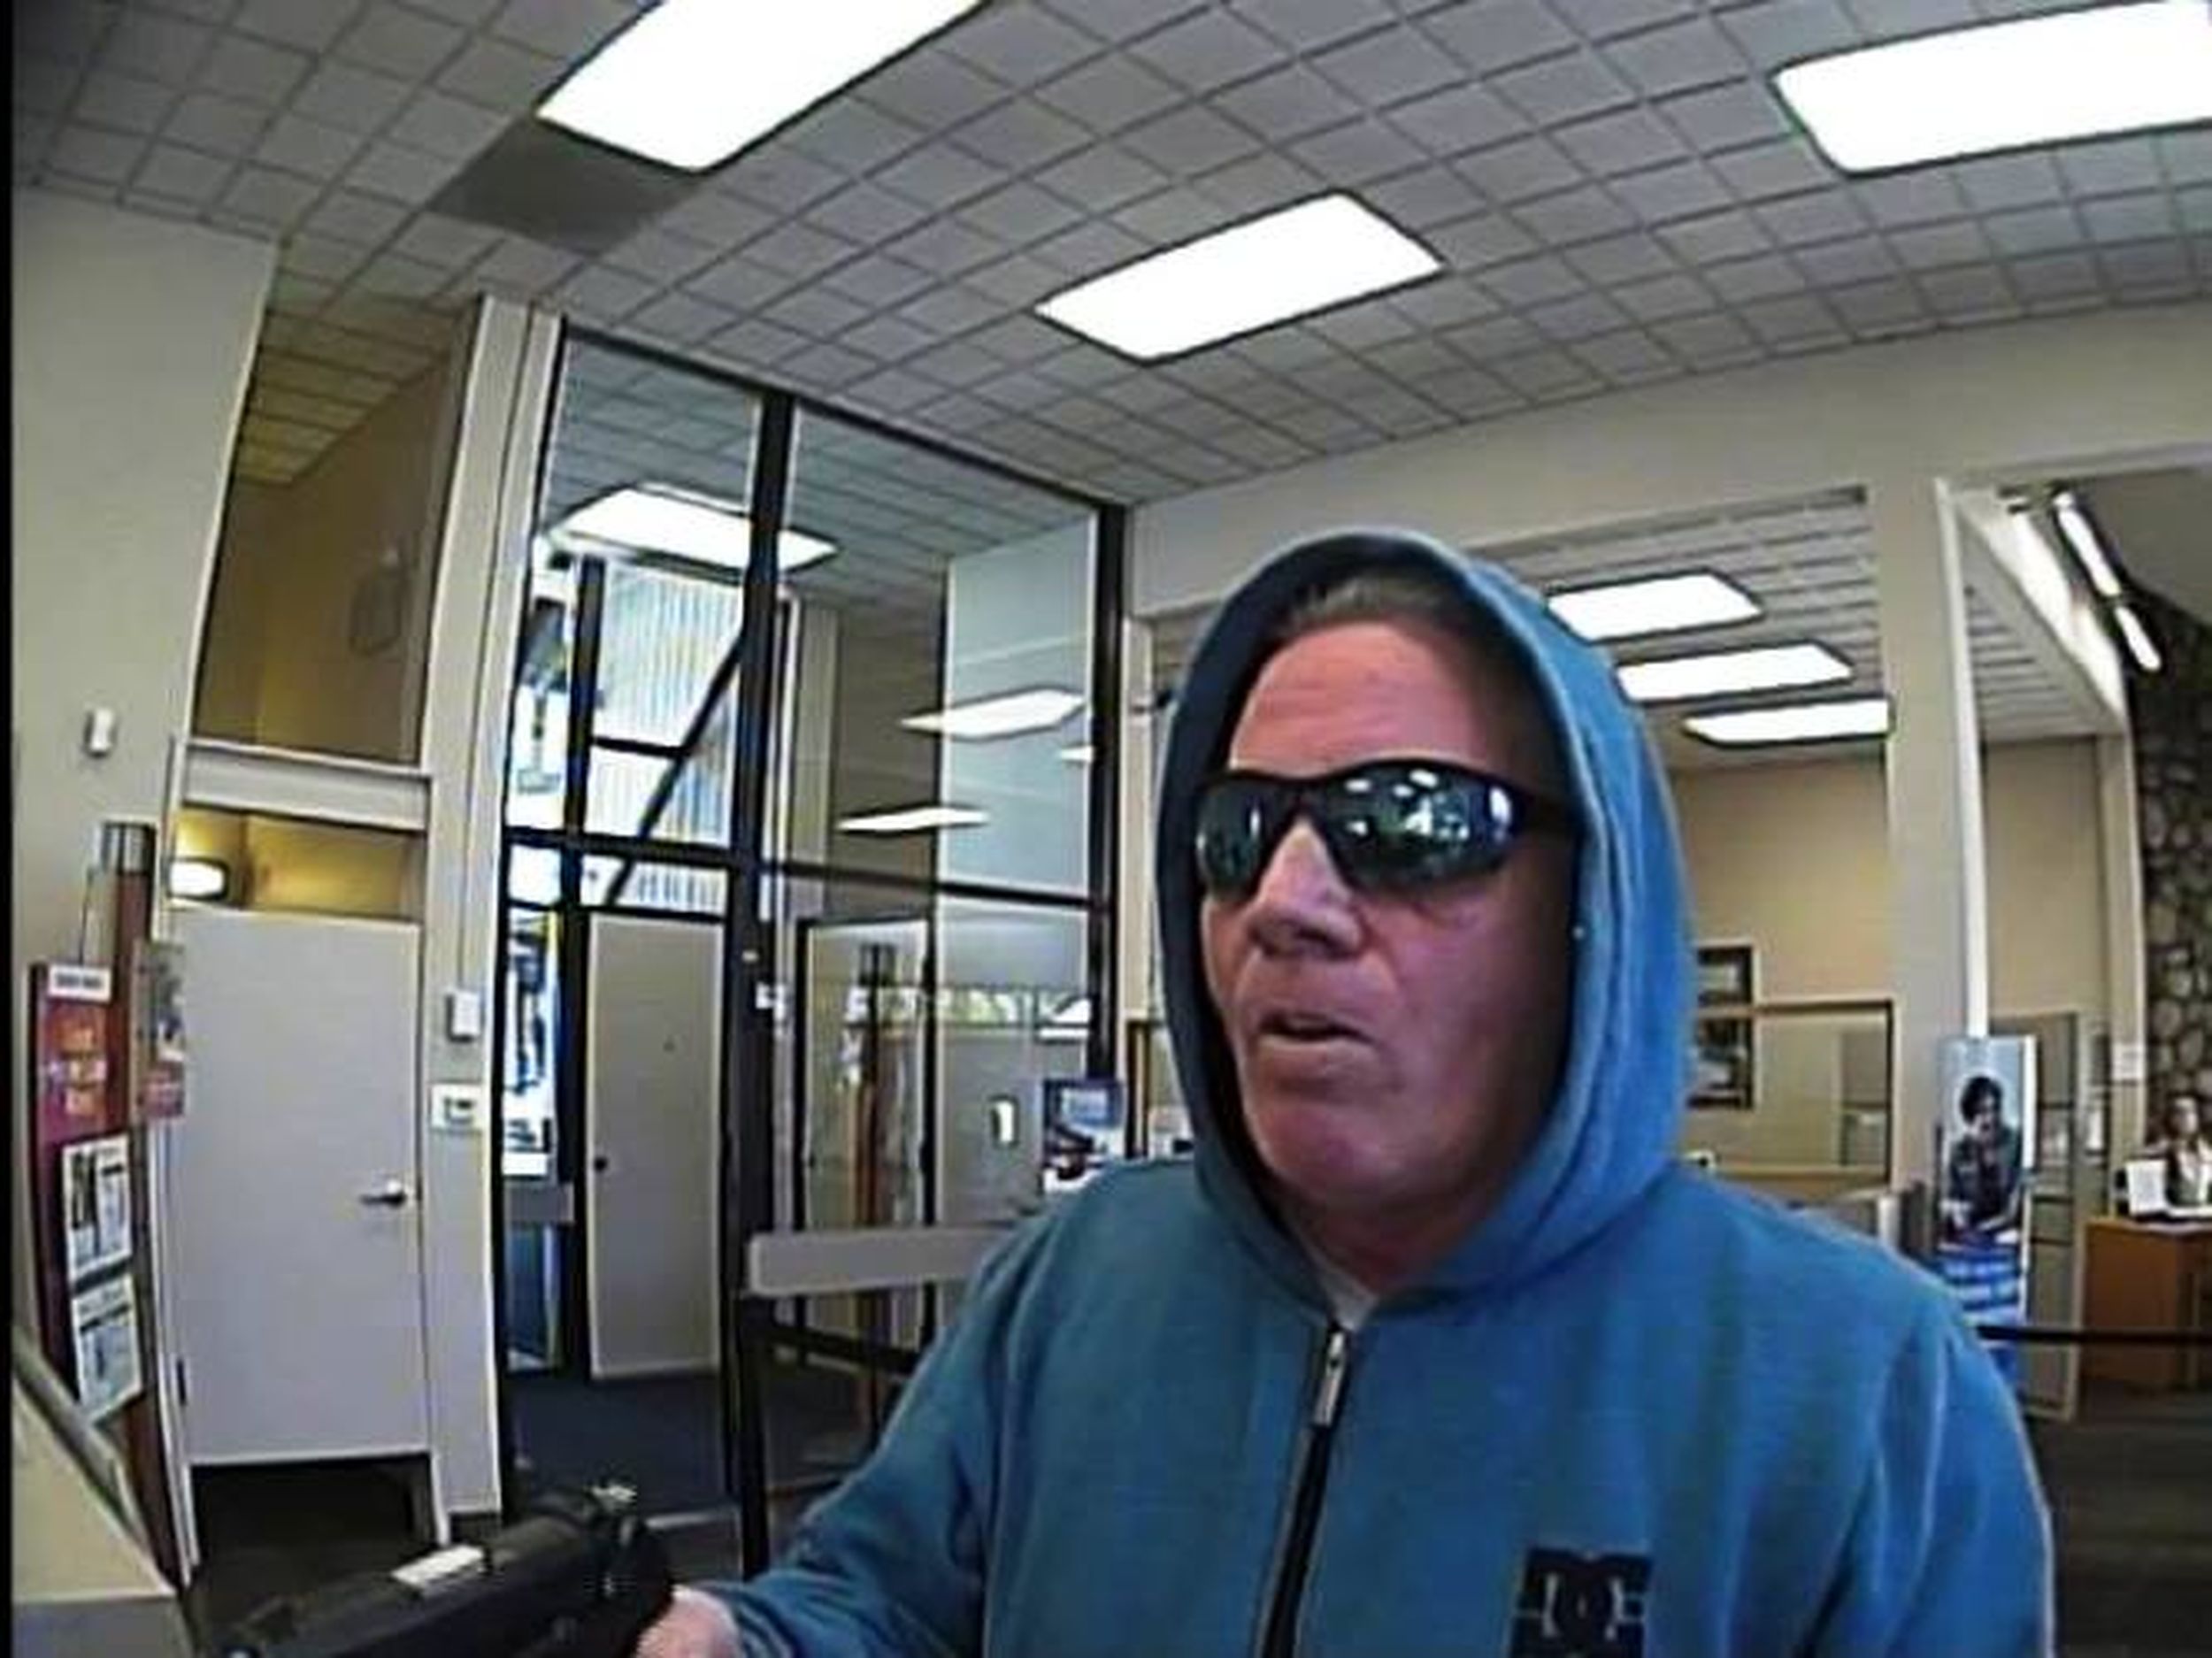 Post Falls Police Arrest Alleged Morning Bank Robber The Spokesman Review 0703